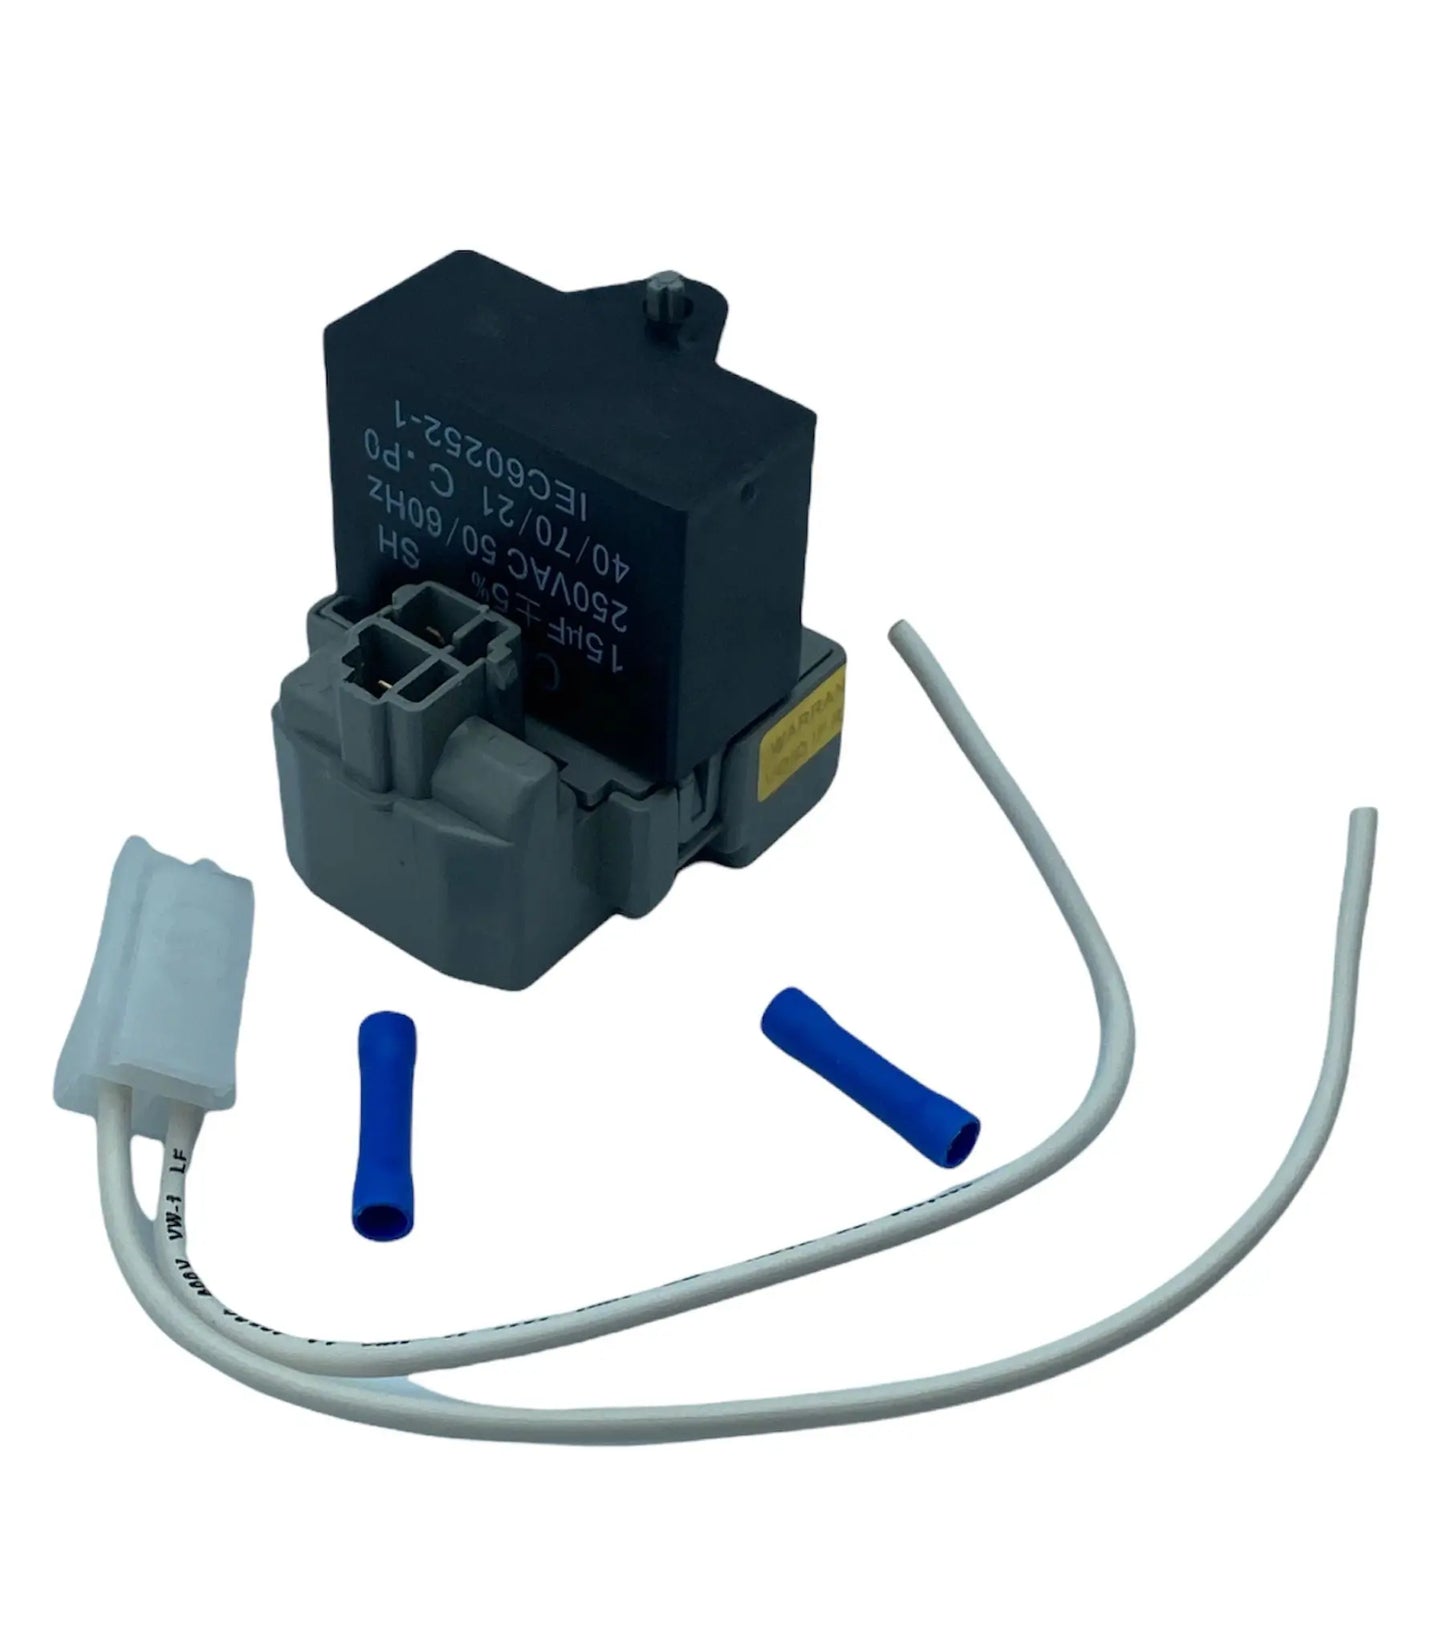 G.E Refrigerator Start Device Kit - WR08X22874 or WR01F03770,  REPLACES: WR07X10133 4454642 AP5970731 PS11701228 EAP11701228 197D8031P005 PD00039282 INVERTEC